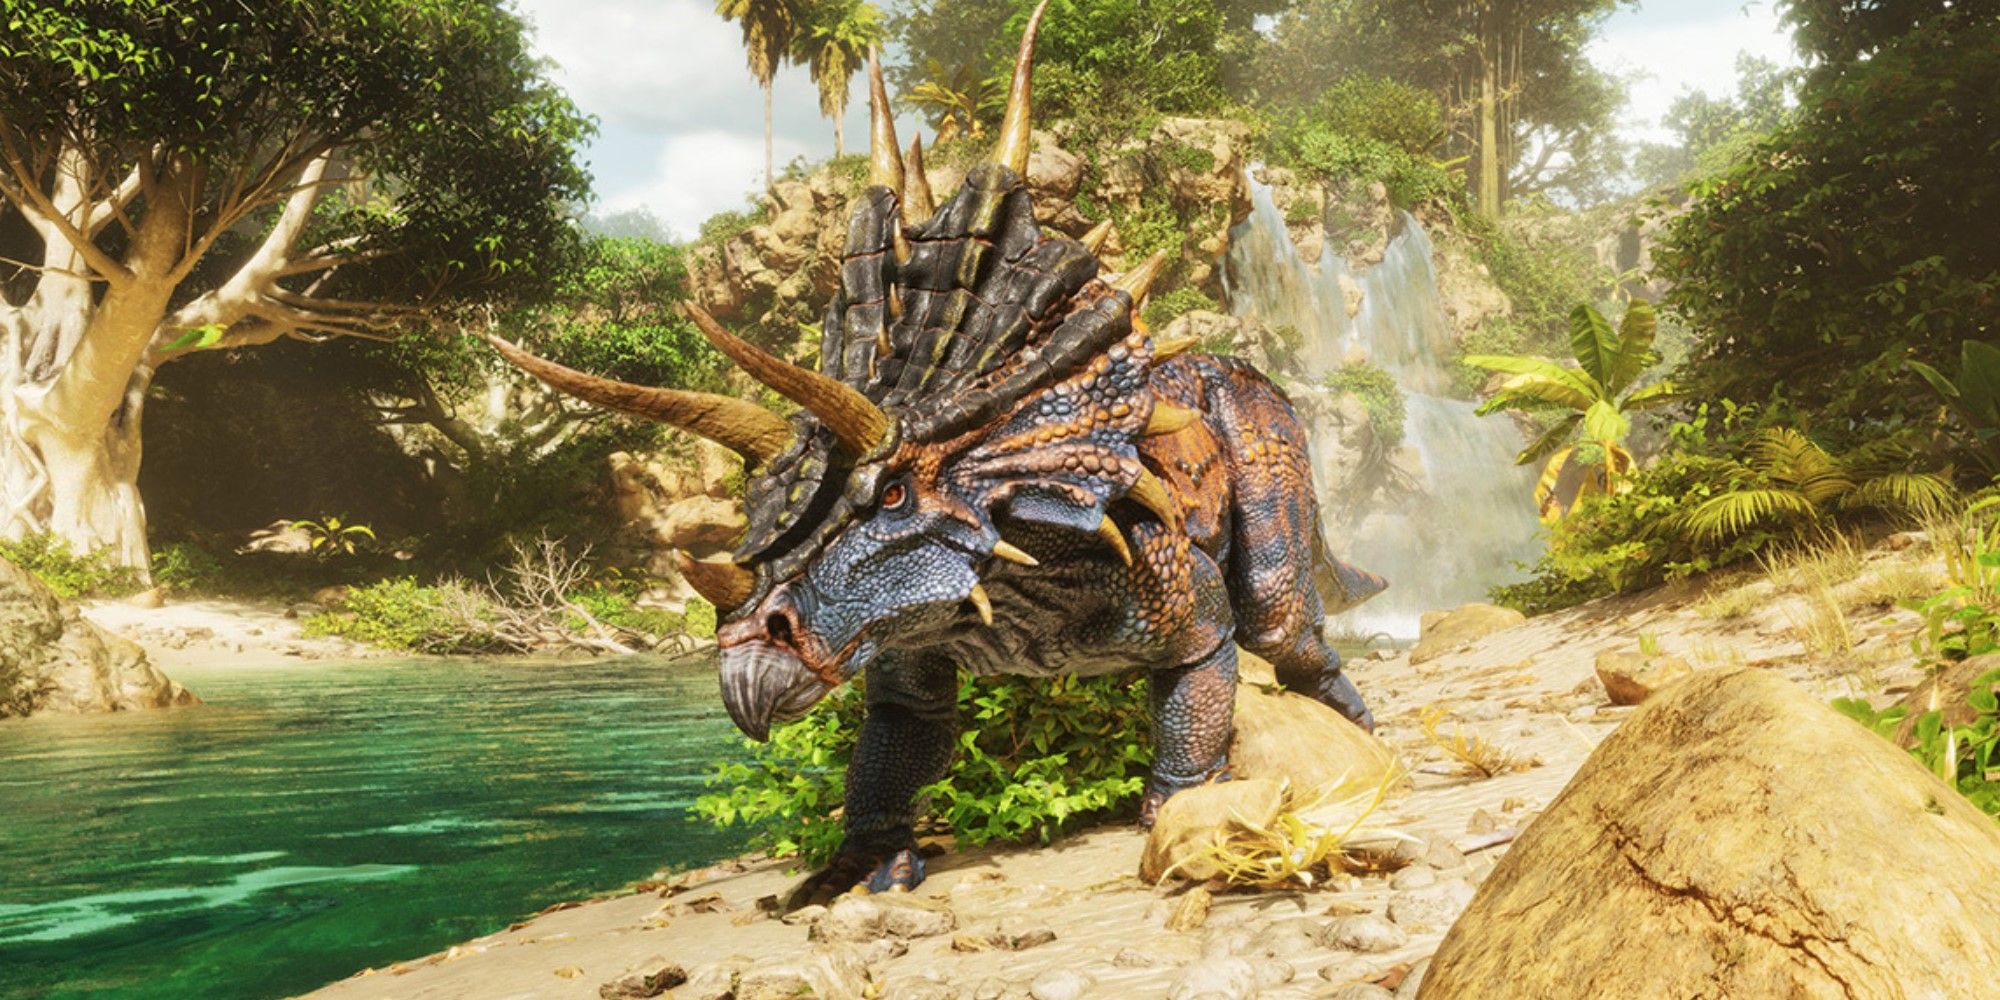 Ark: Survival Ascended' delayed to October with a slight launch discount